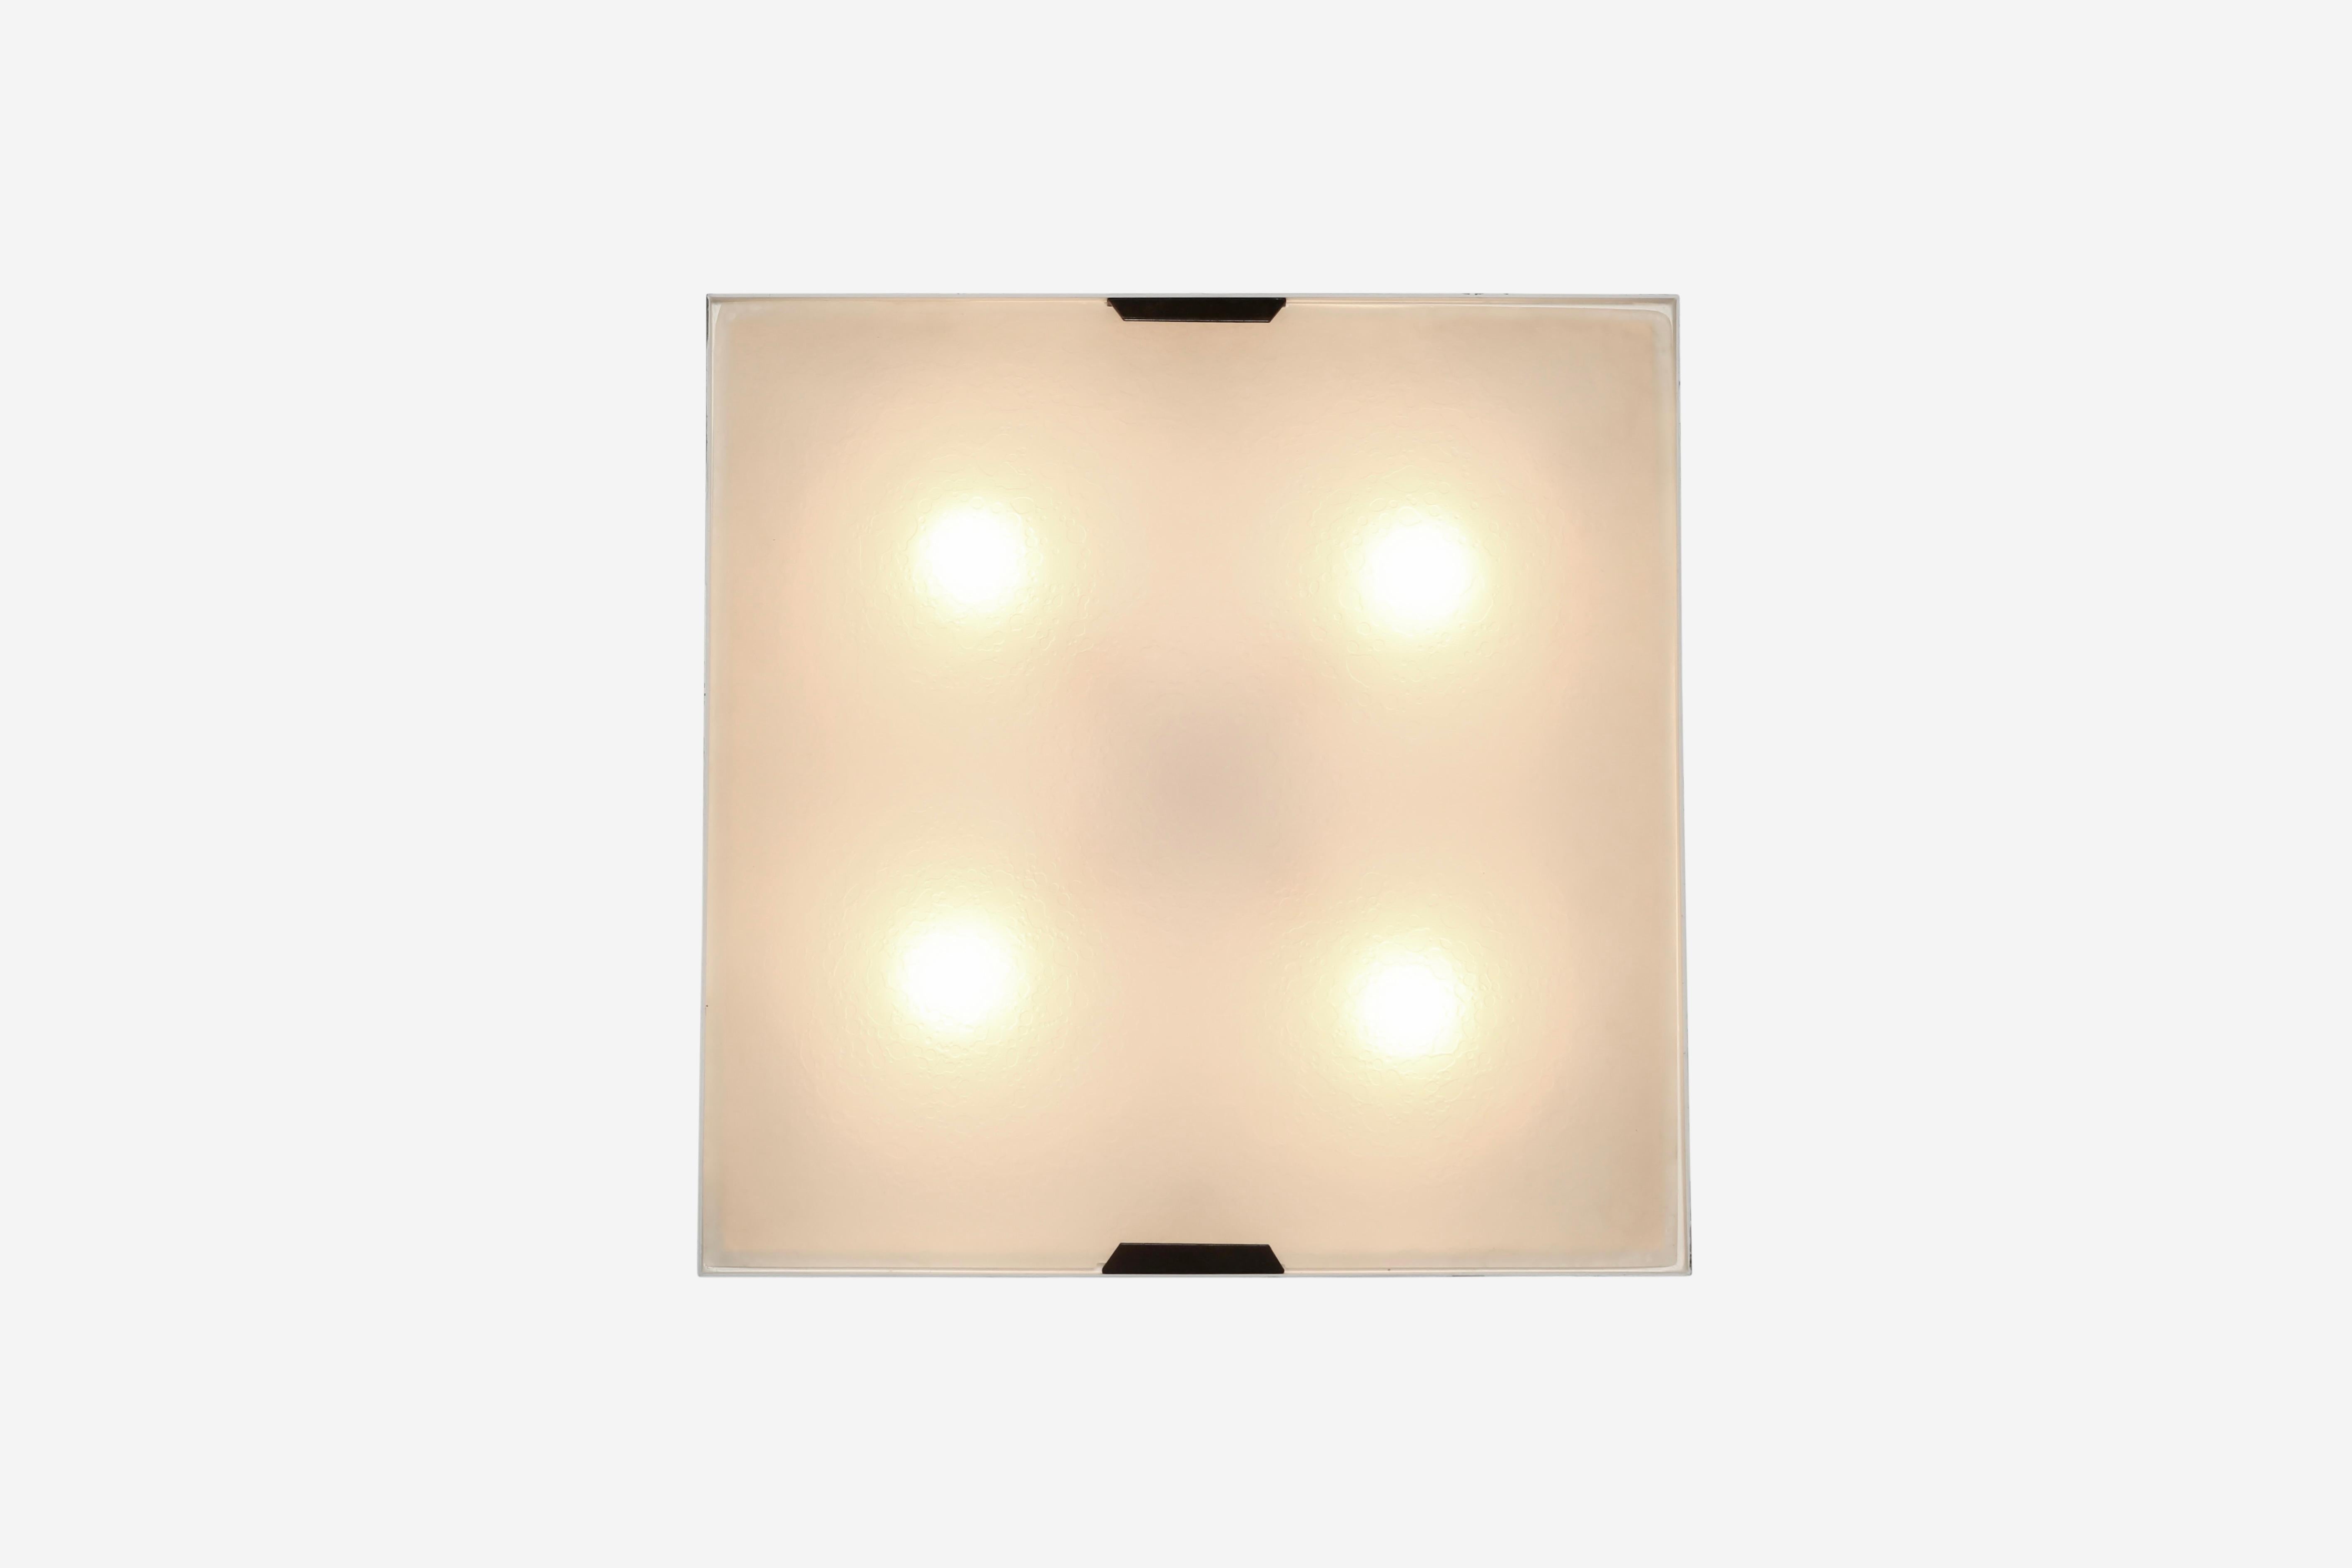 Stilnovo flush mount or wall light.
Designed and manufactured in Italy in 1960s.
Intricate textured glass, brass and enameled metal frame.
Four candelabra sockets.
Complimentary US rewiring upon request.